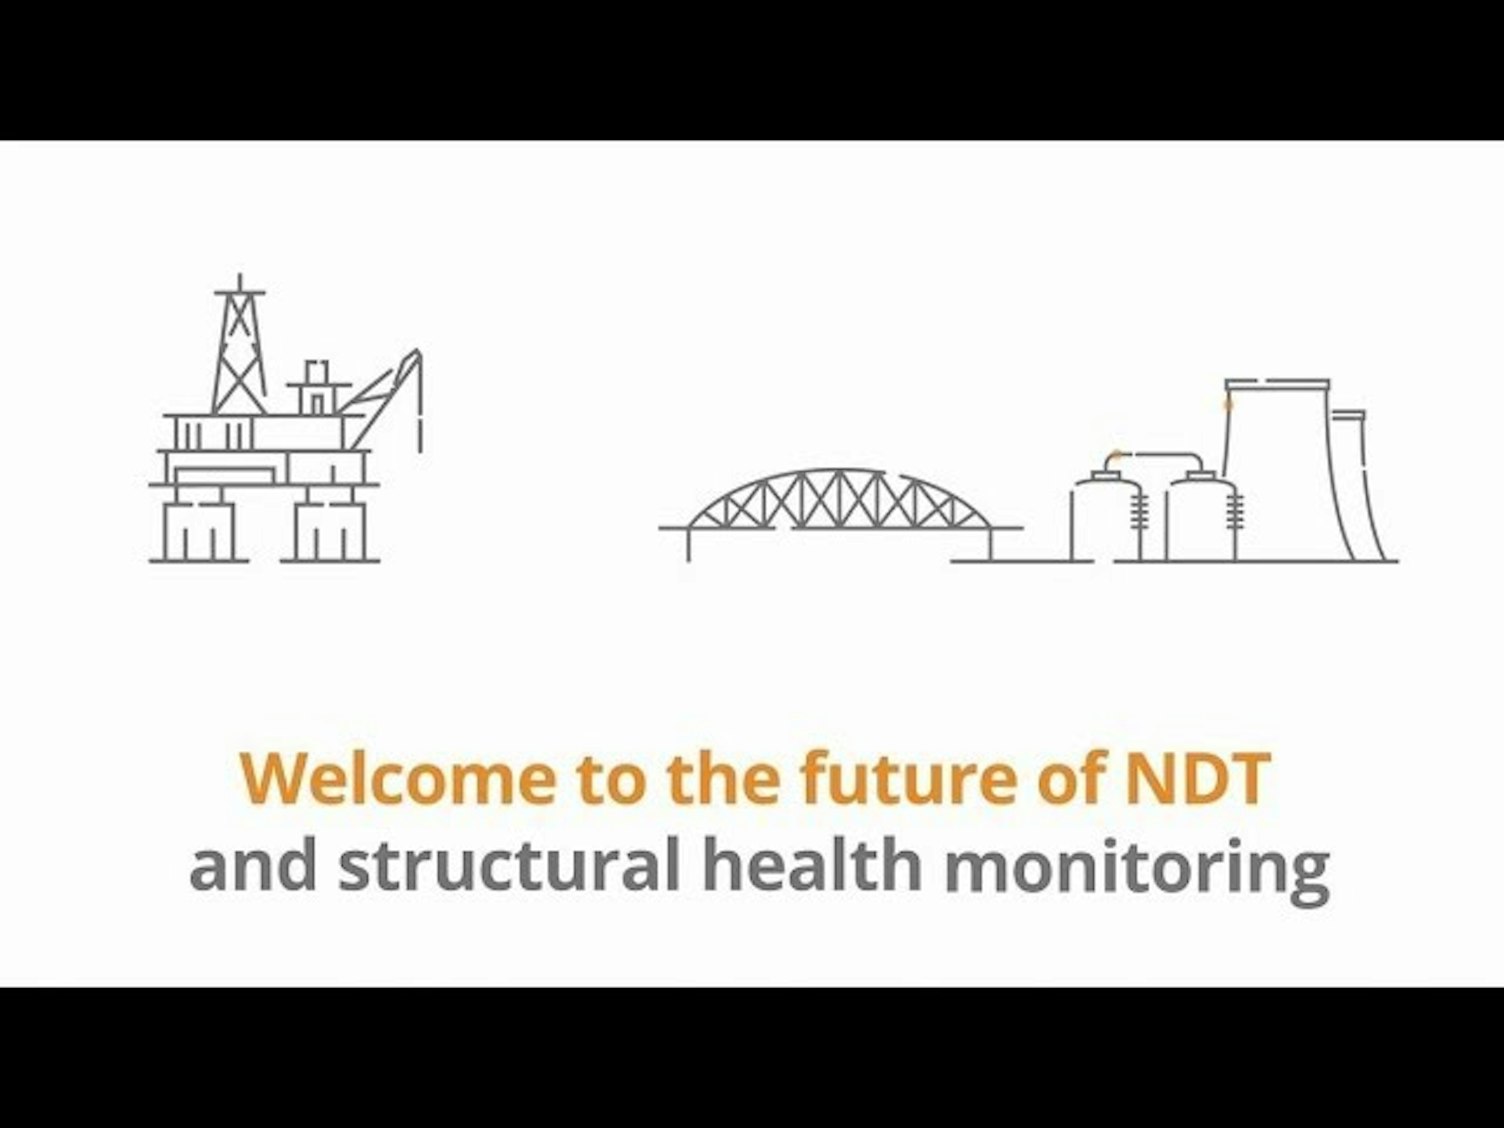 D&I Global: Innovative NDT for Structural Health Monitoring thumbnail